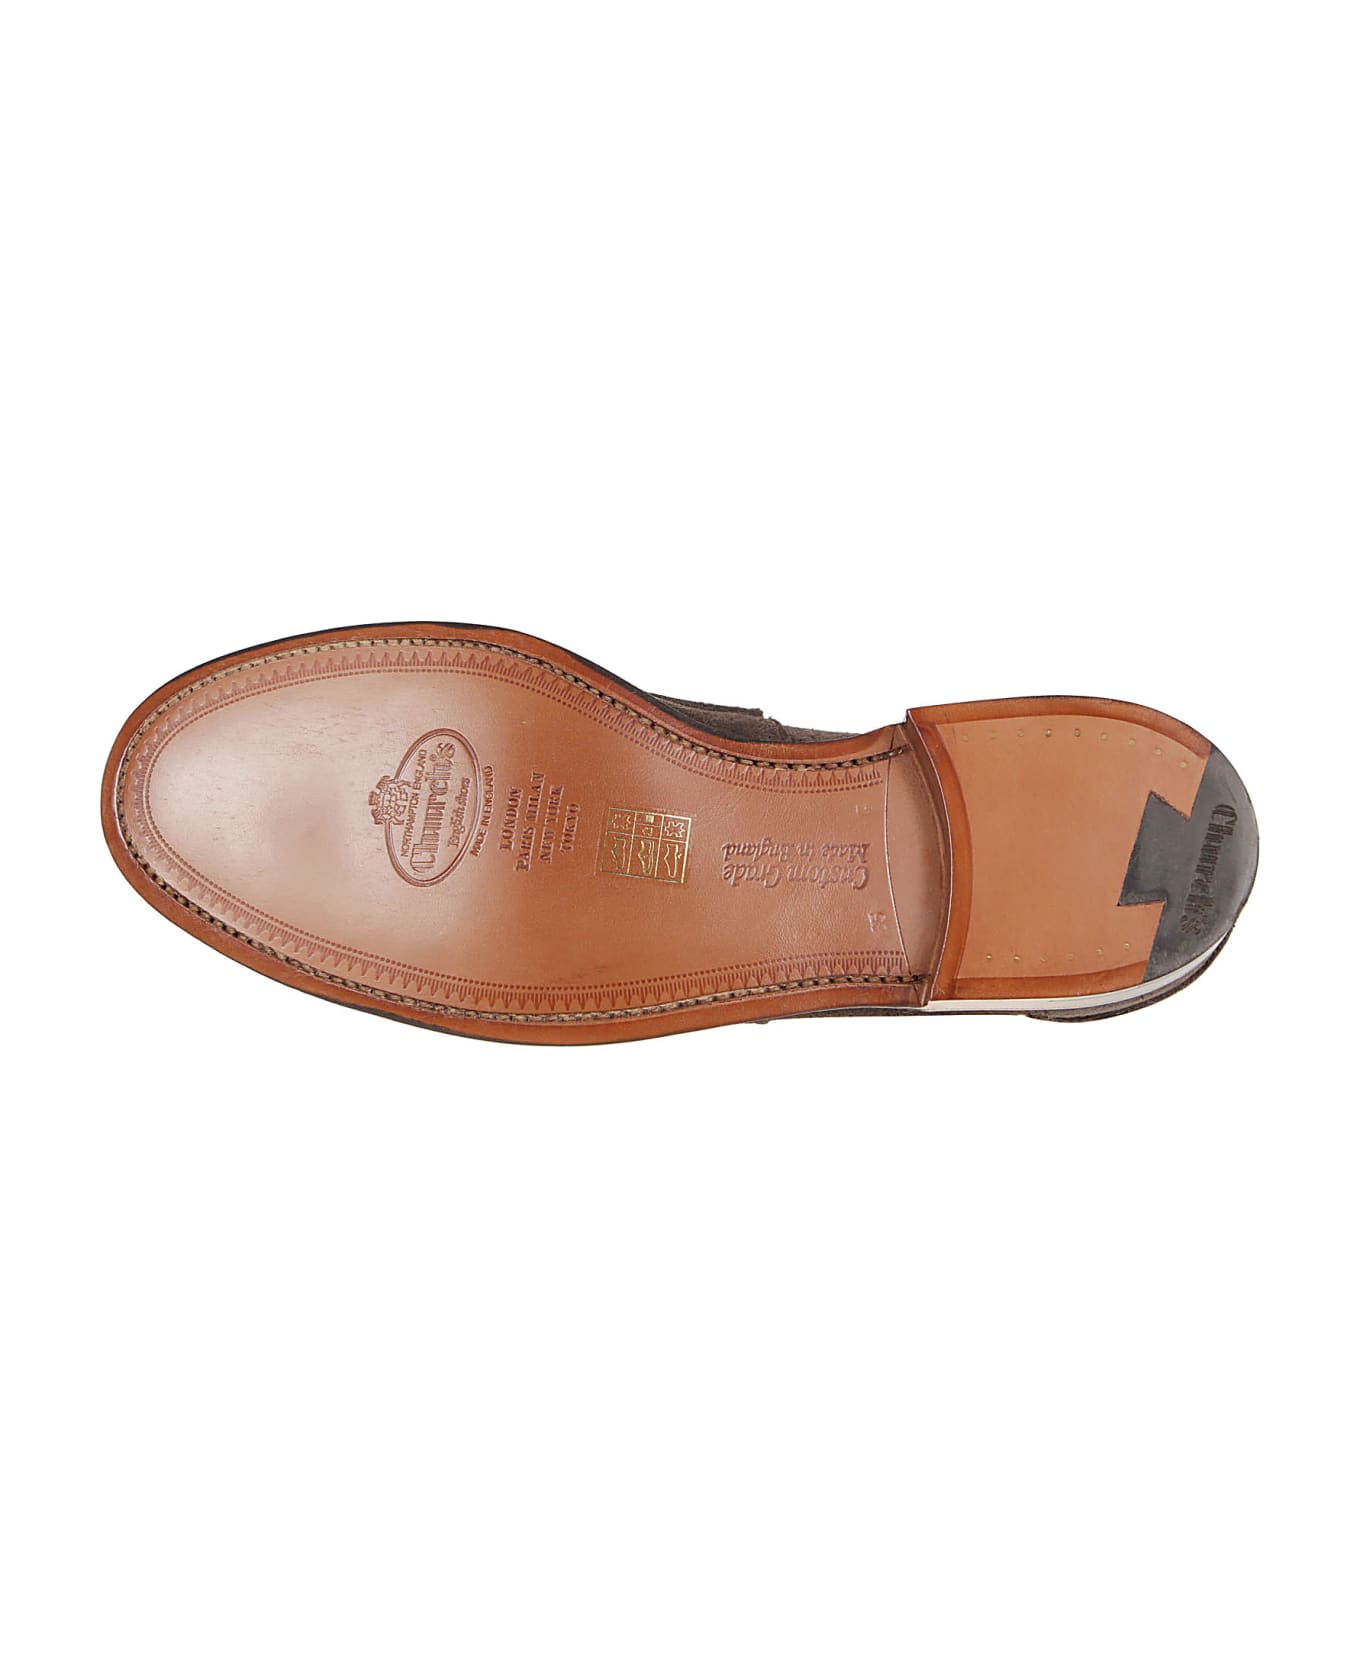 Church's Pembrey Loafers - Aad Brown